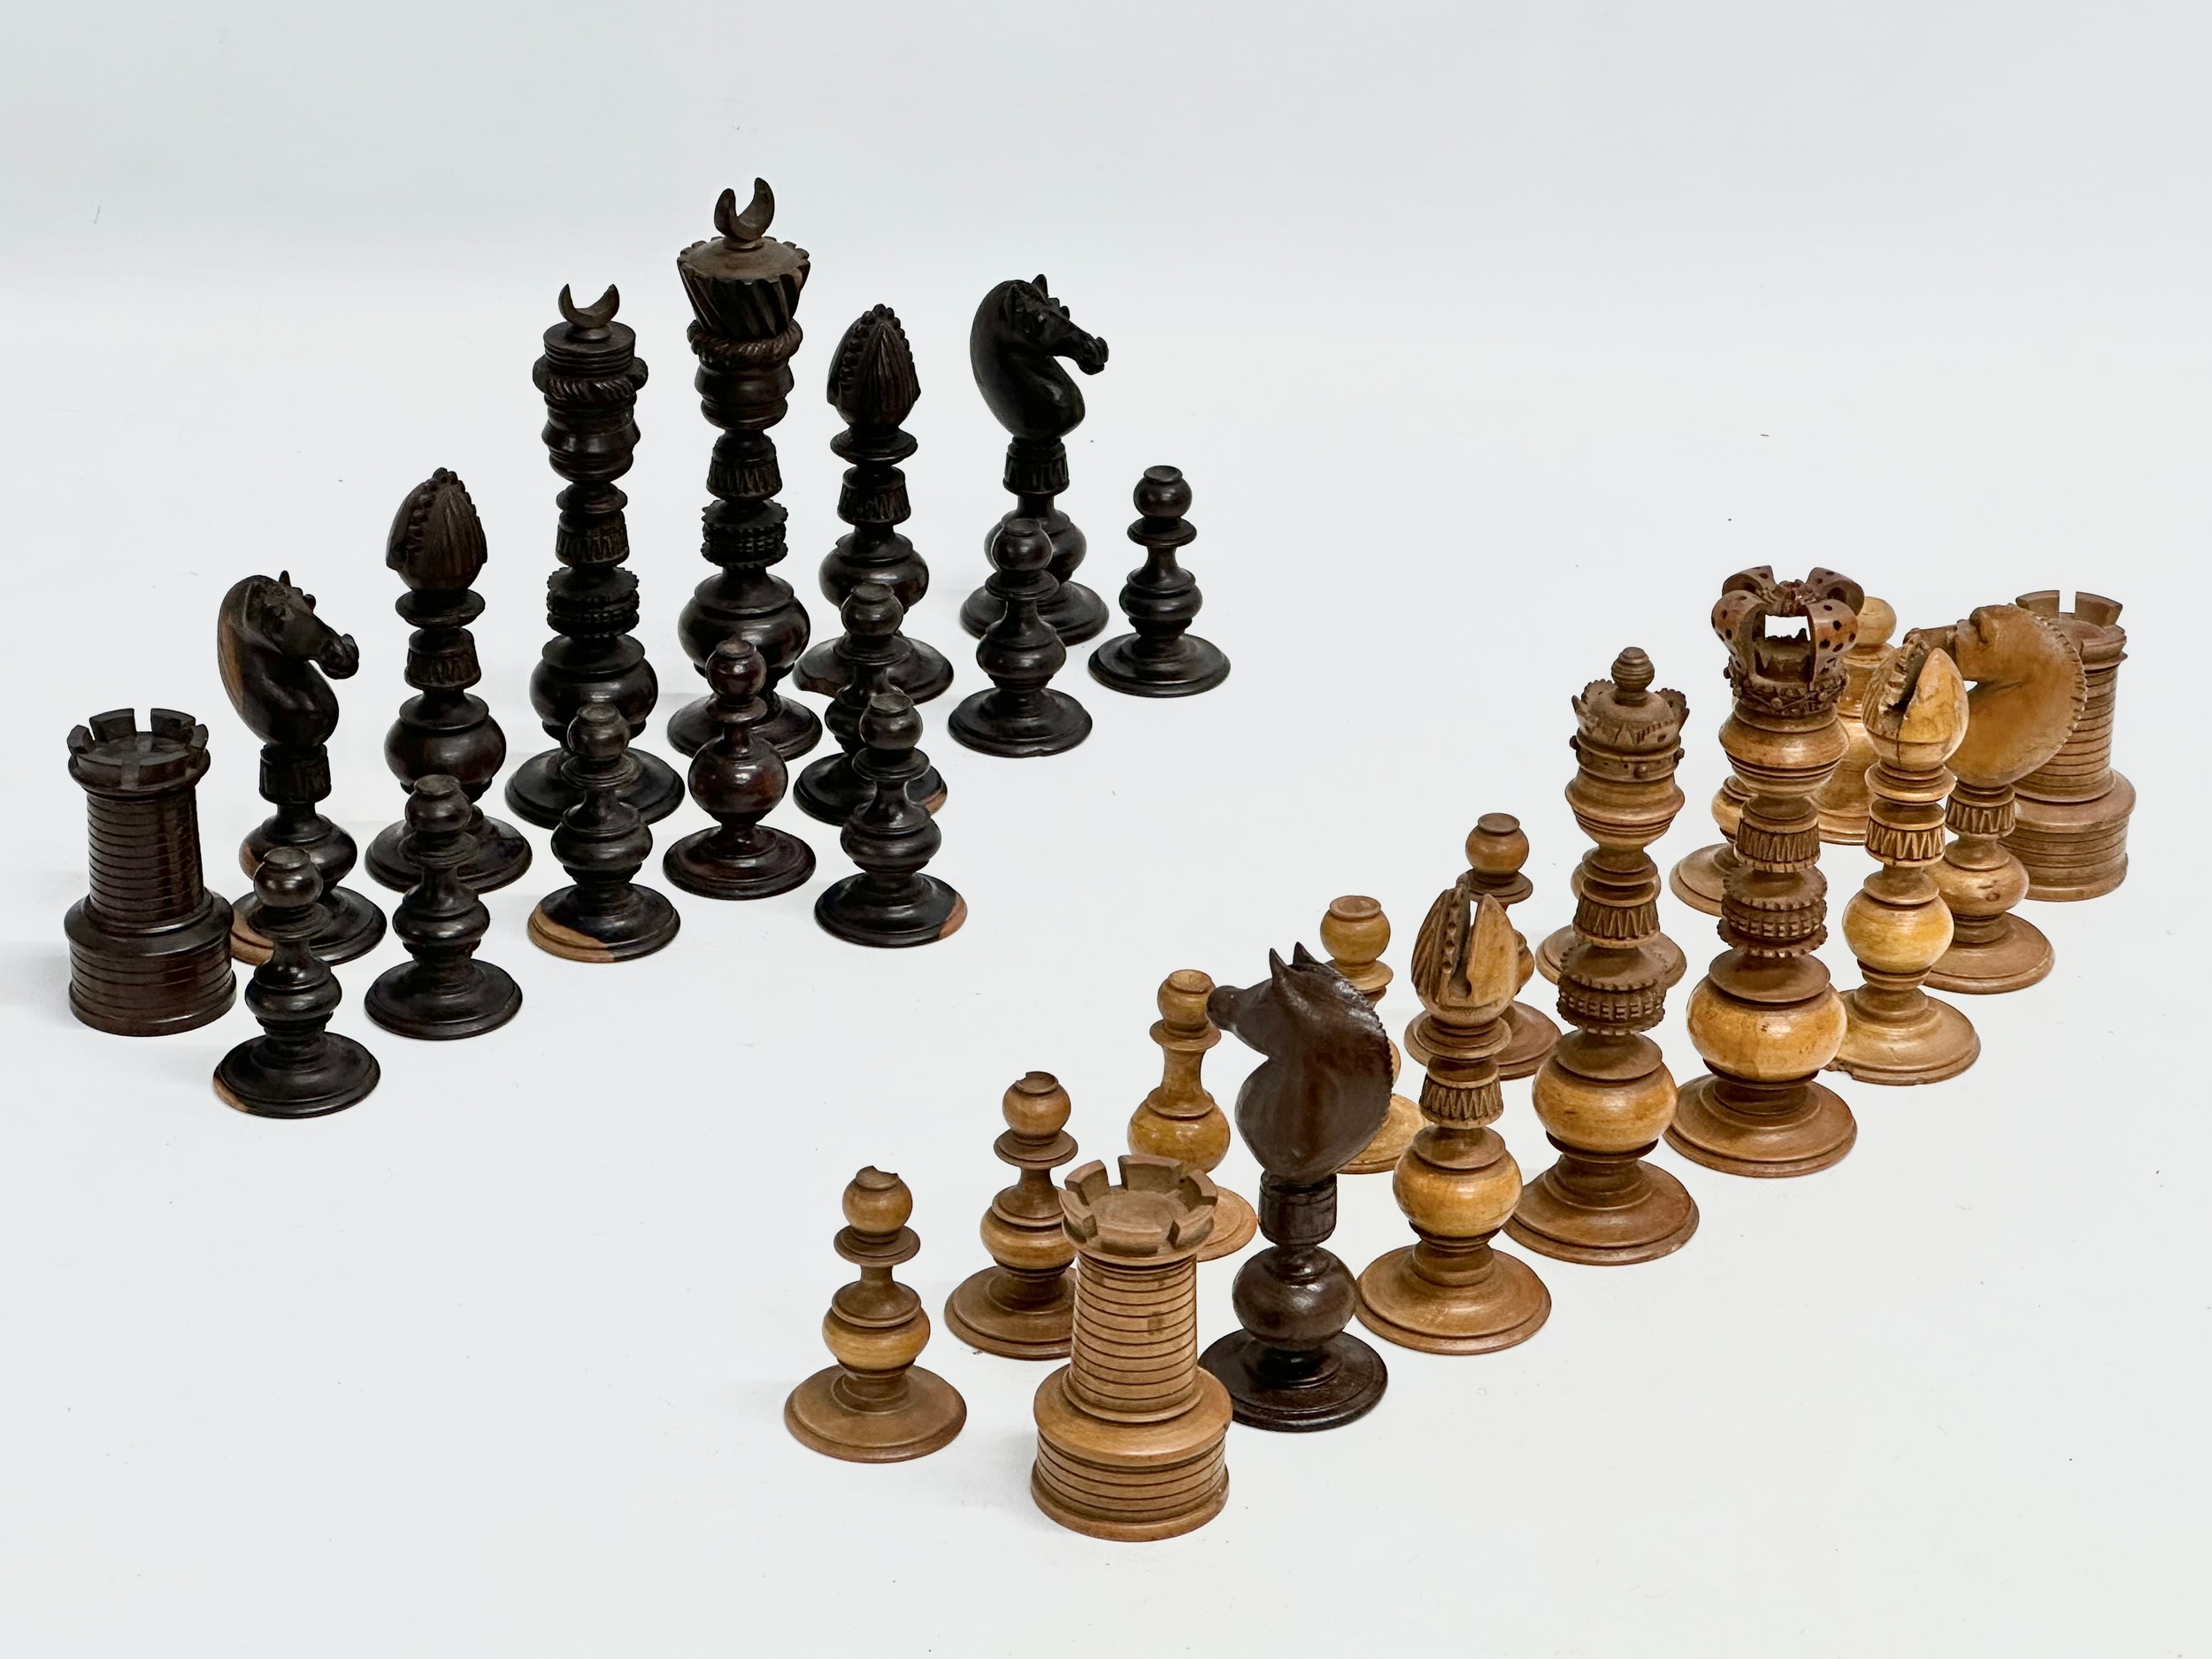 Good quality 19th Century chess pieces in the style of the Holy Land Crusade, Islamic vs Christian